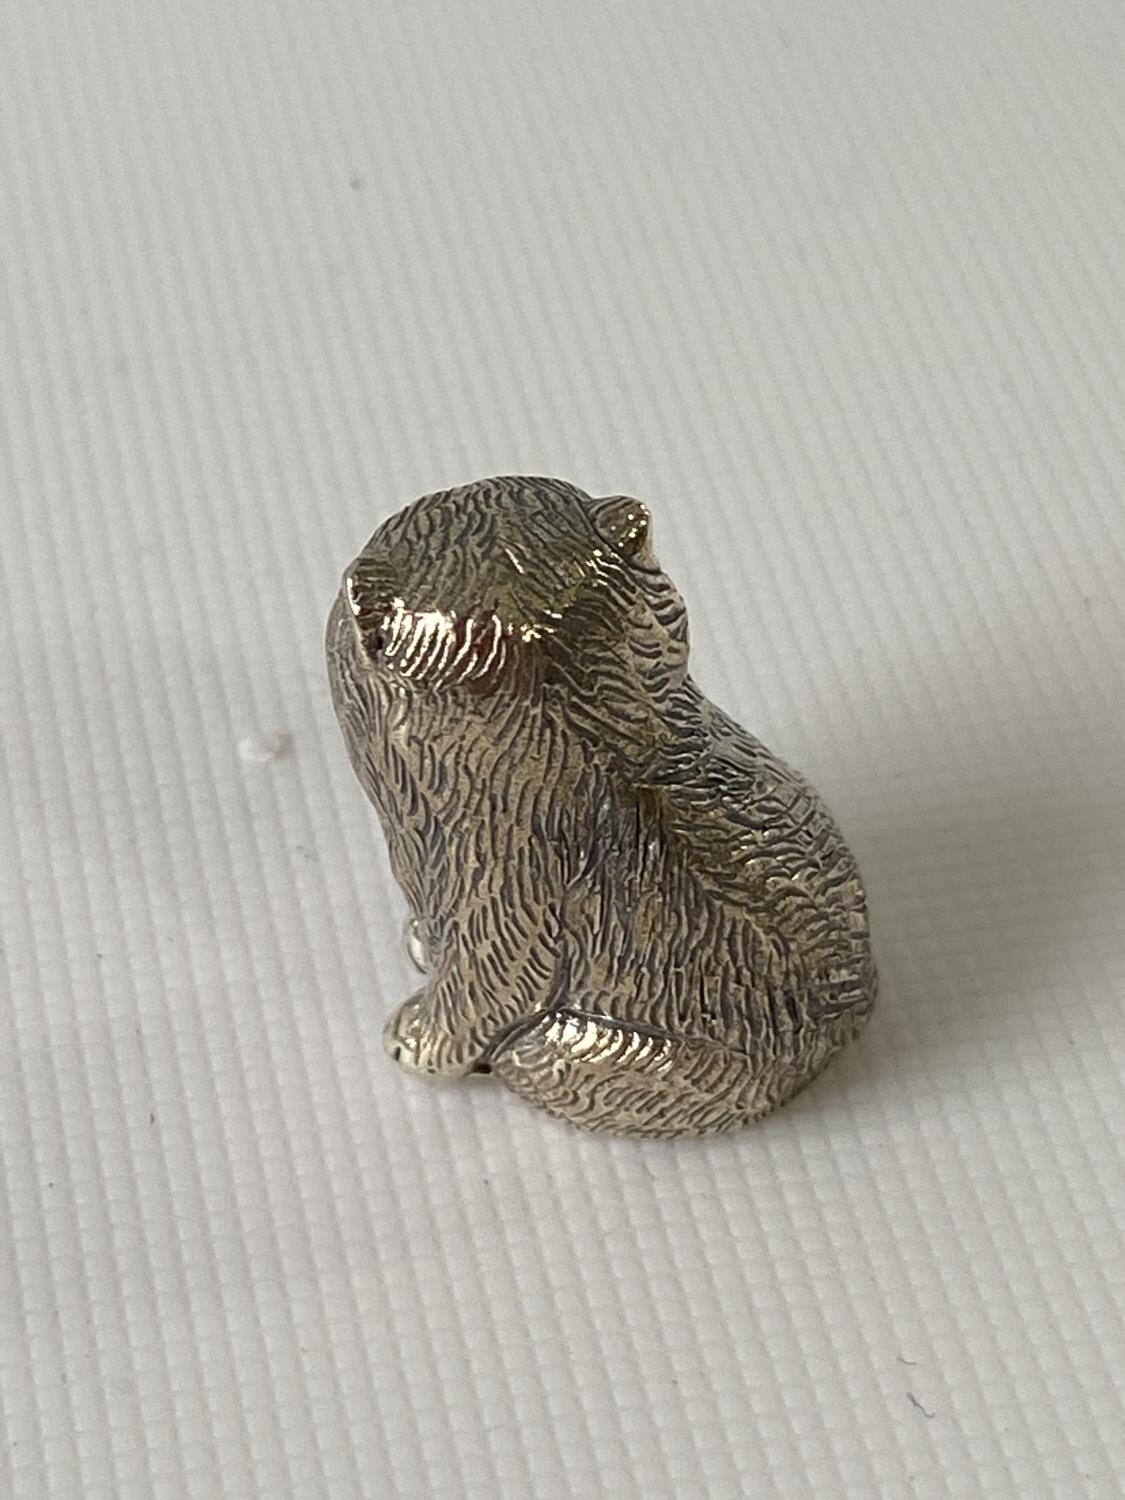 A silver figure of a cat with emerald eyes. [2.3CM IN HEIGHT] - Image 6 of 10